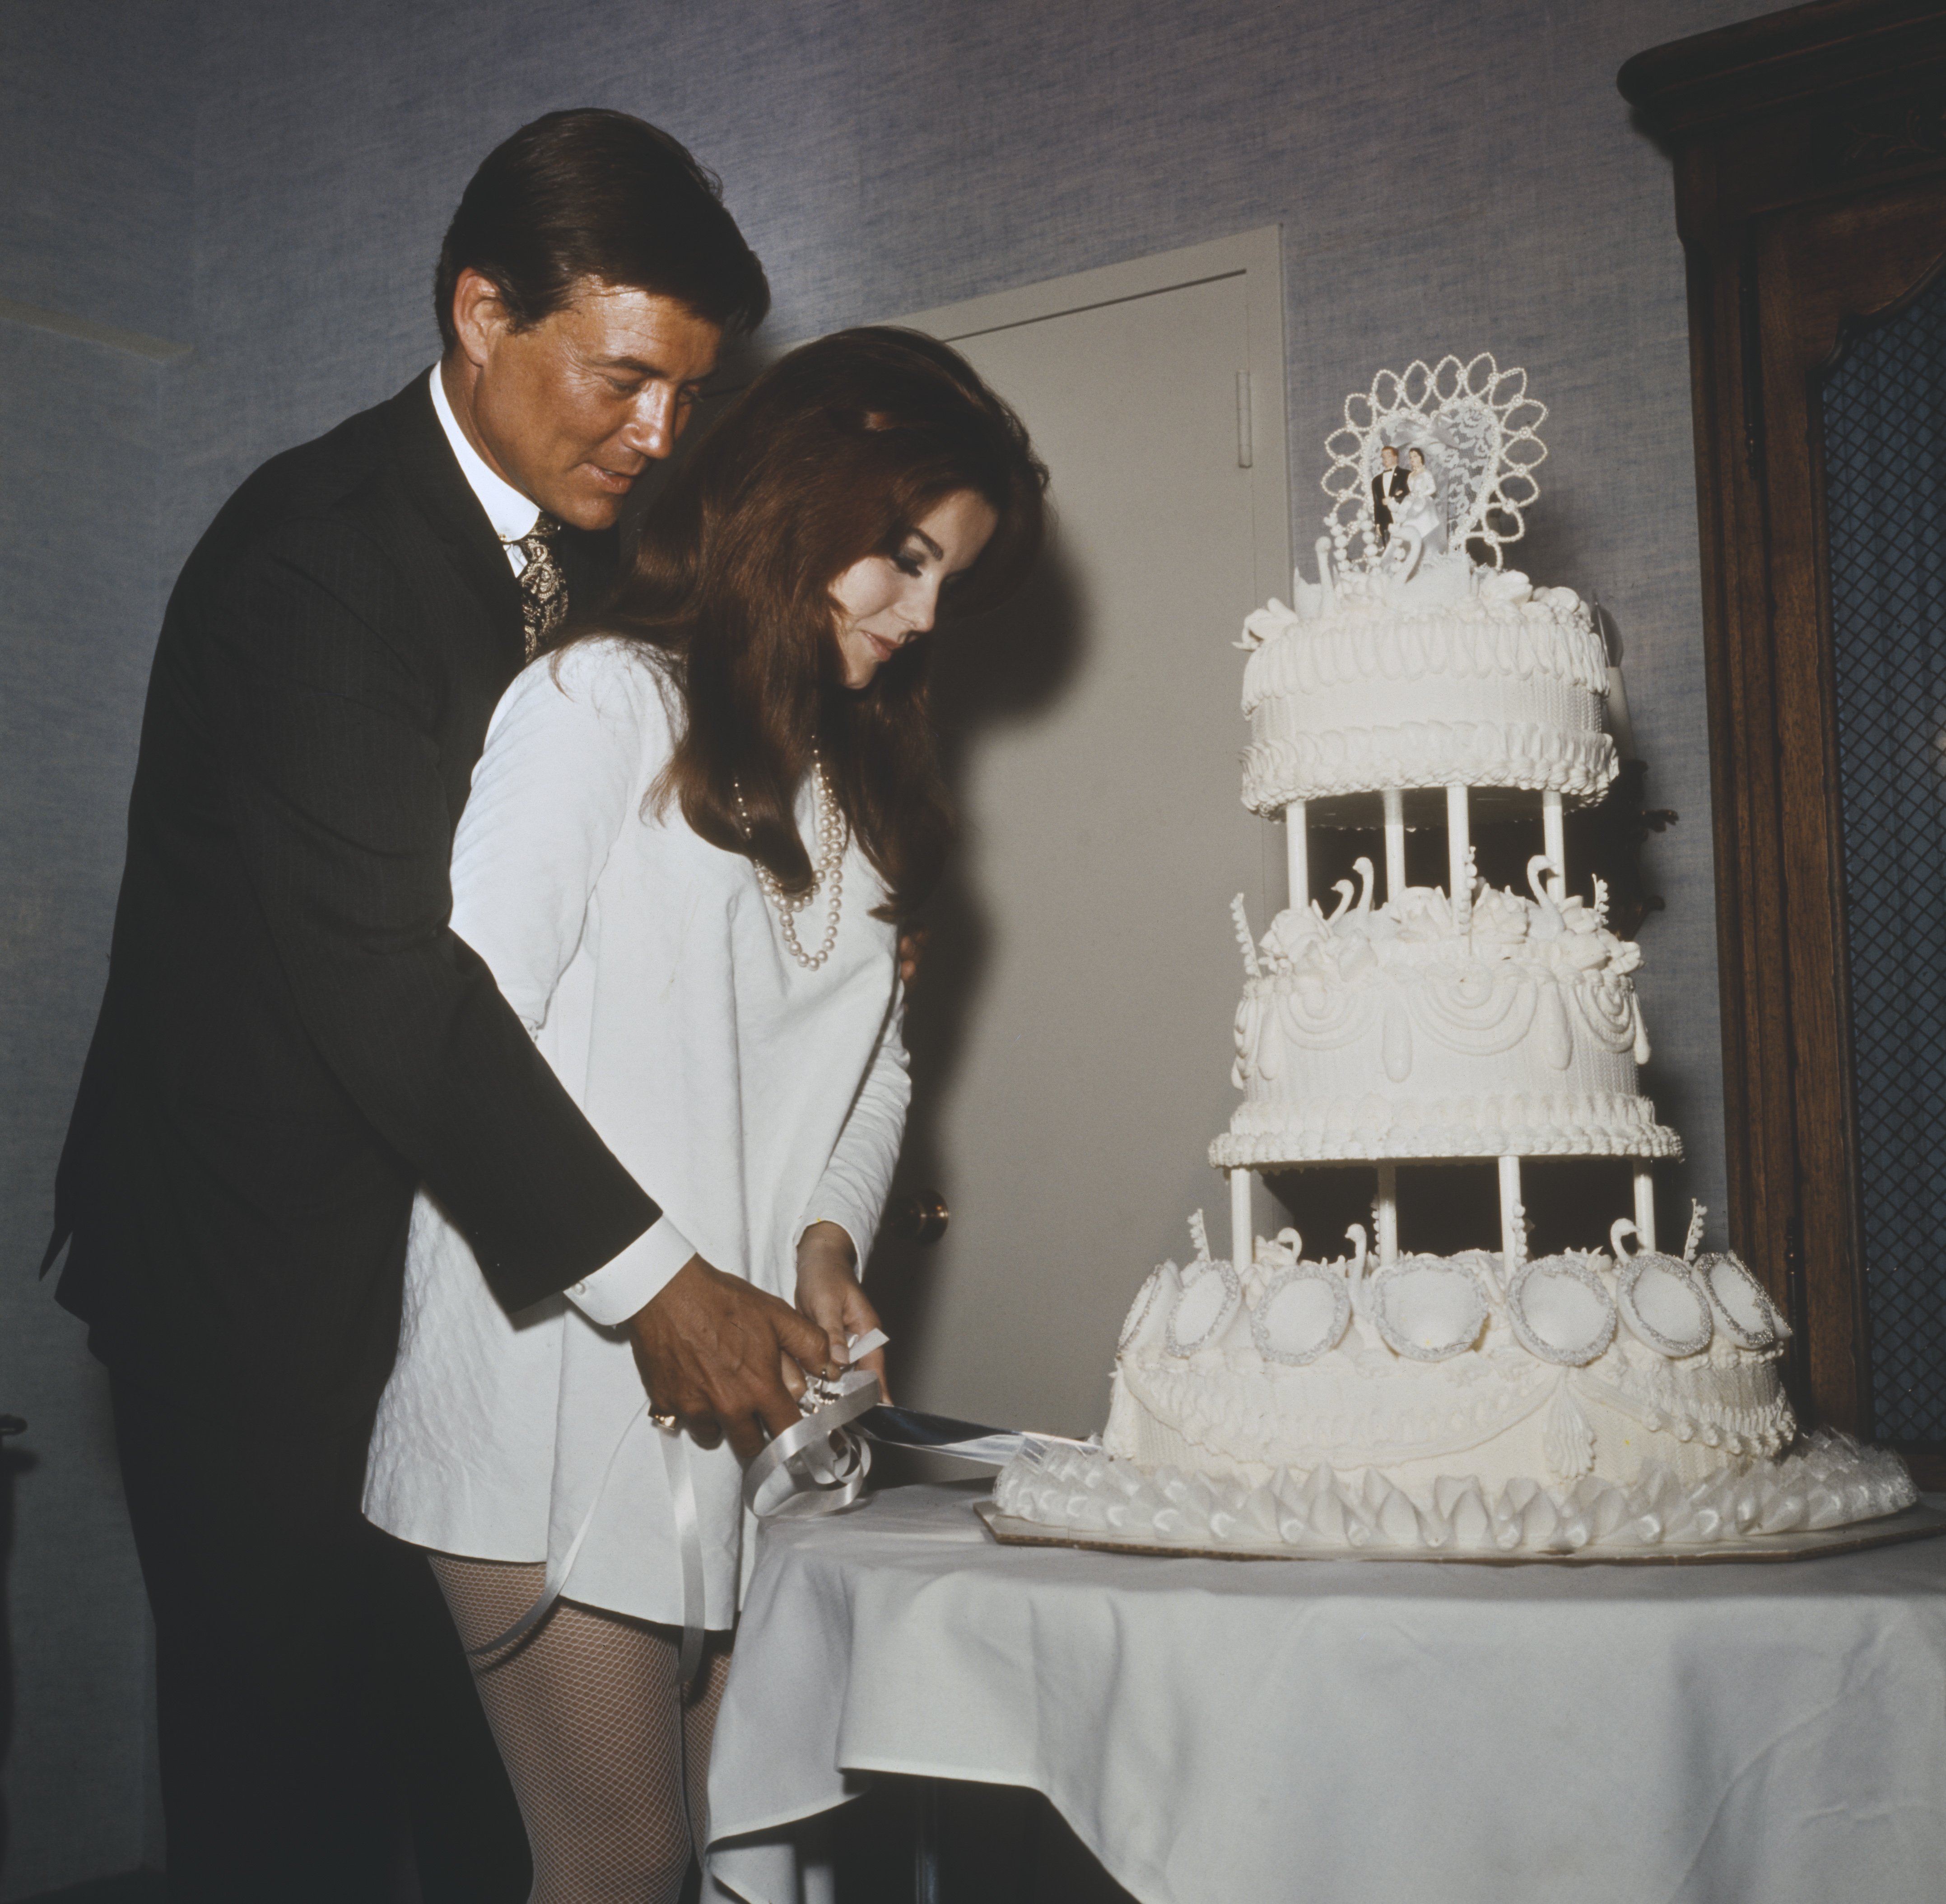 Newlyweds Roger Smith and Ann-Margret cut their wedding cake after their nuptials at the Riviera Hotel on May 8, 1967 in Las Vegas. | Source: Getty Images